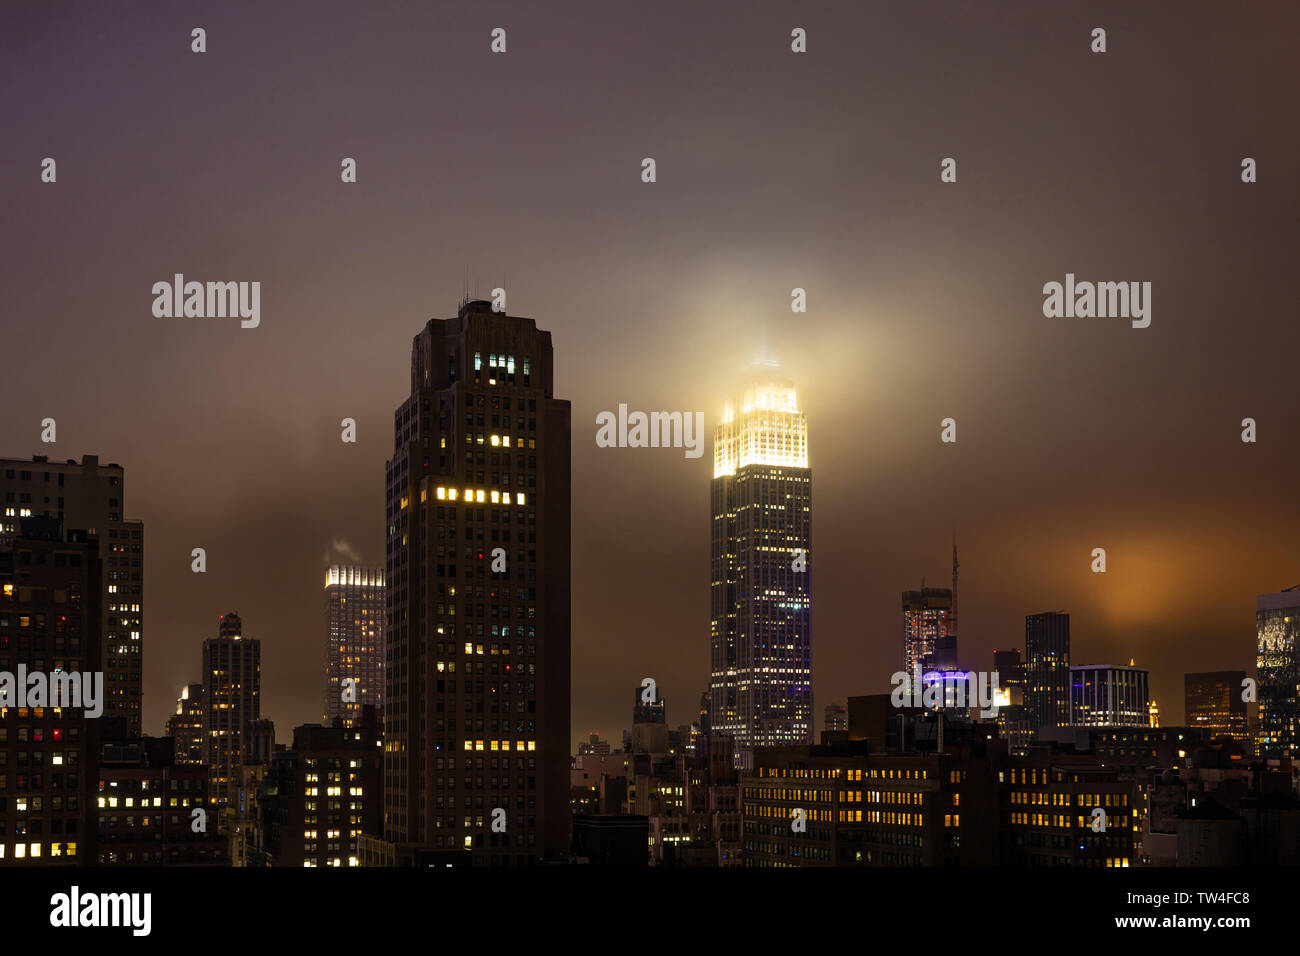 New York, USA. May 5th, 2019. City skyline at night. Aerial view of Manhattan skyscrapers and Empire state building, illuminated Stock Photo